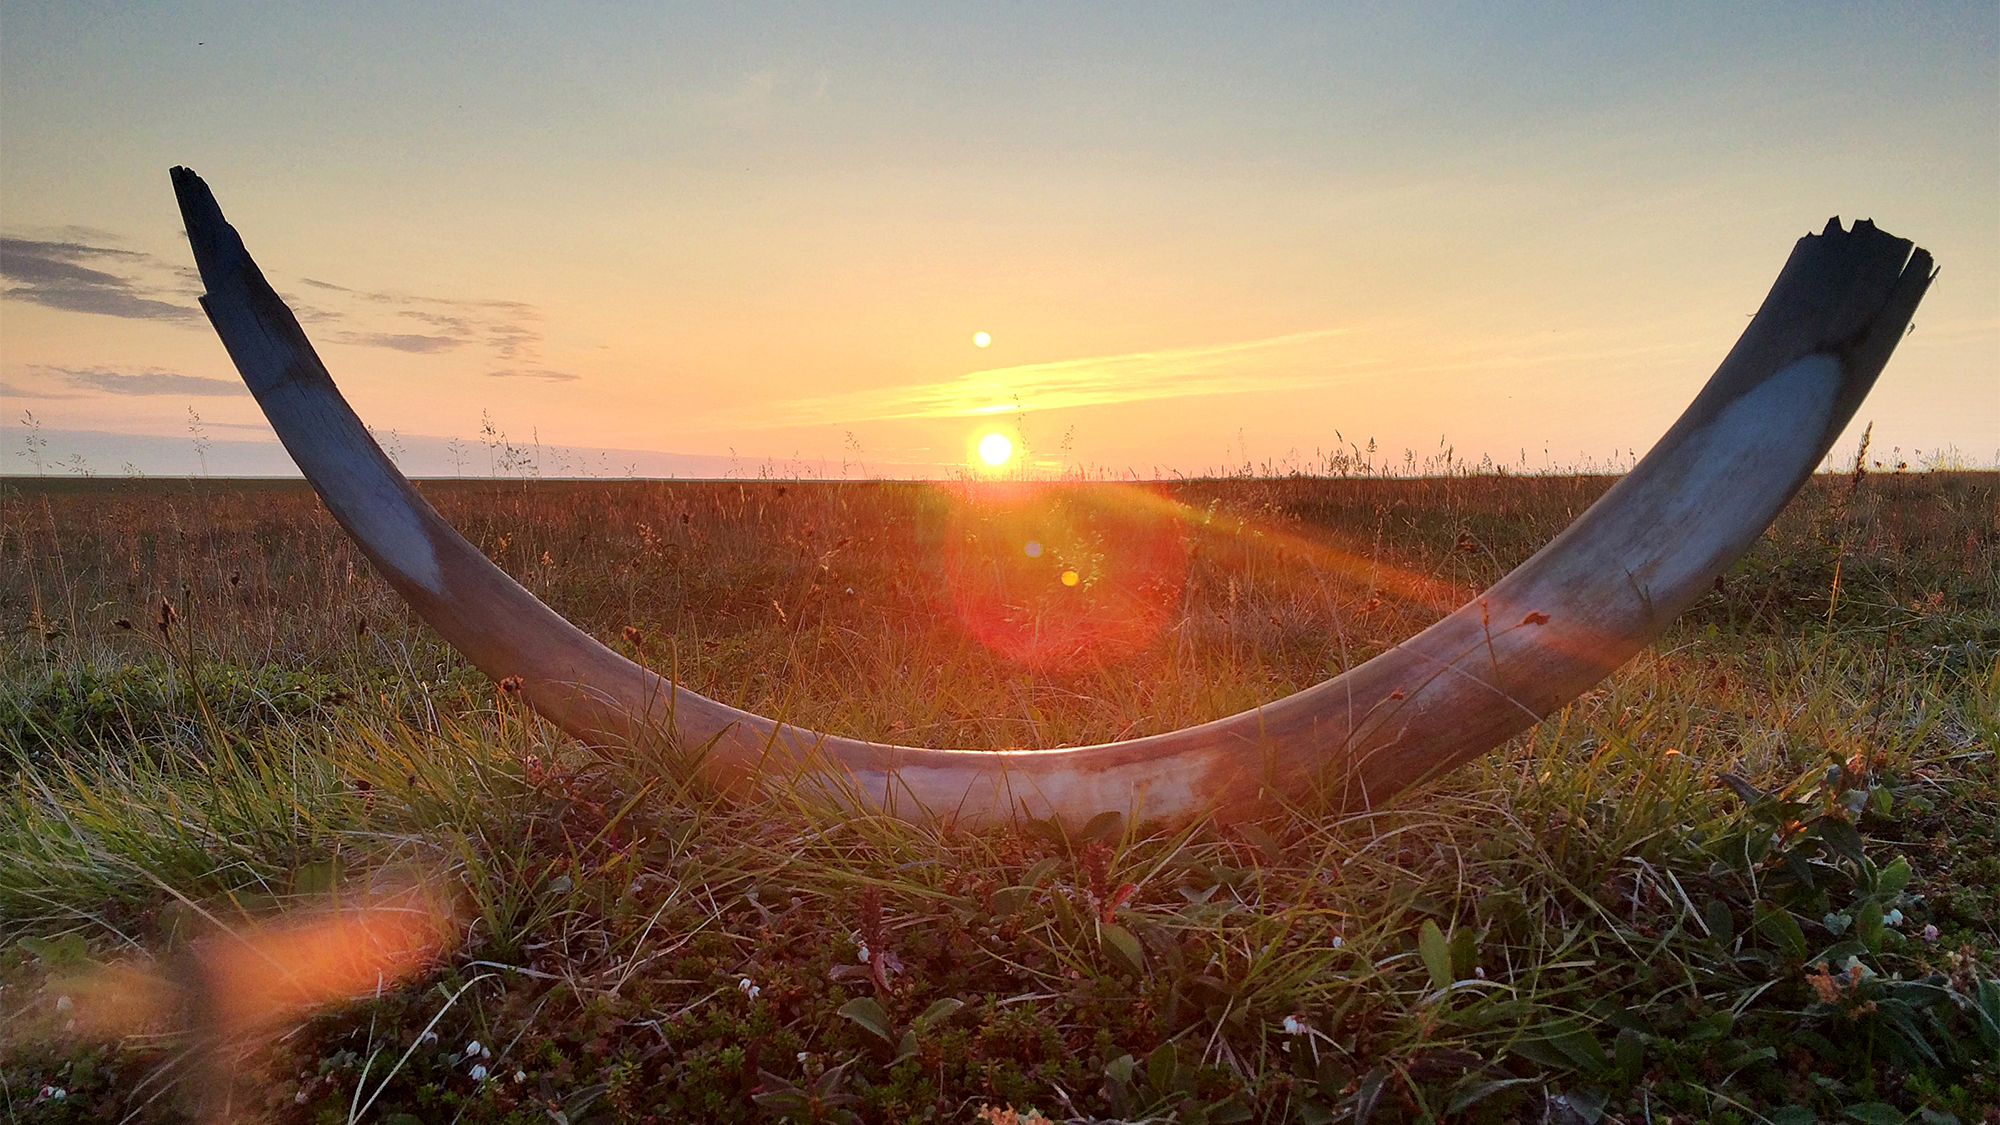 An 18,000 year-old woolly mammoth tusk likes on a grassy field with the sun rising over it. The tusk was discovered in northeastern Siberia in 2015.